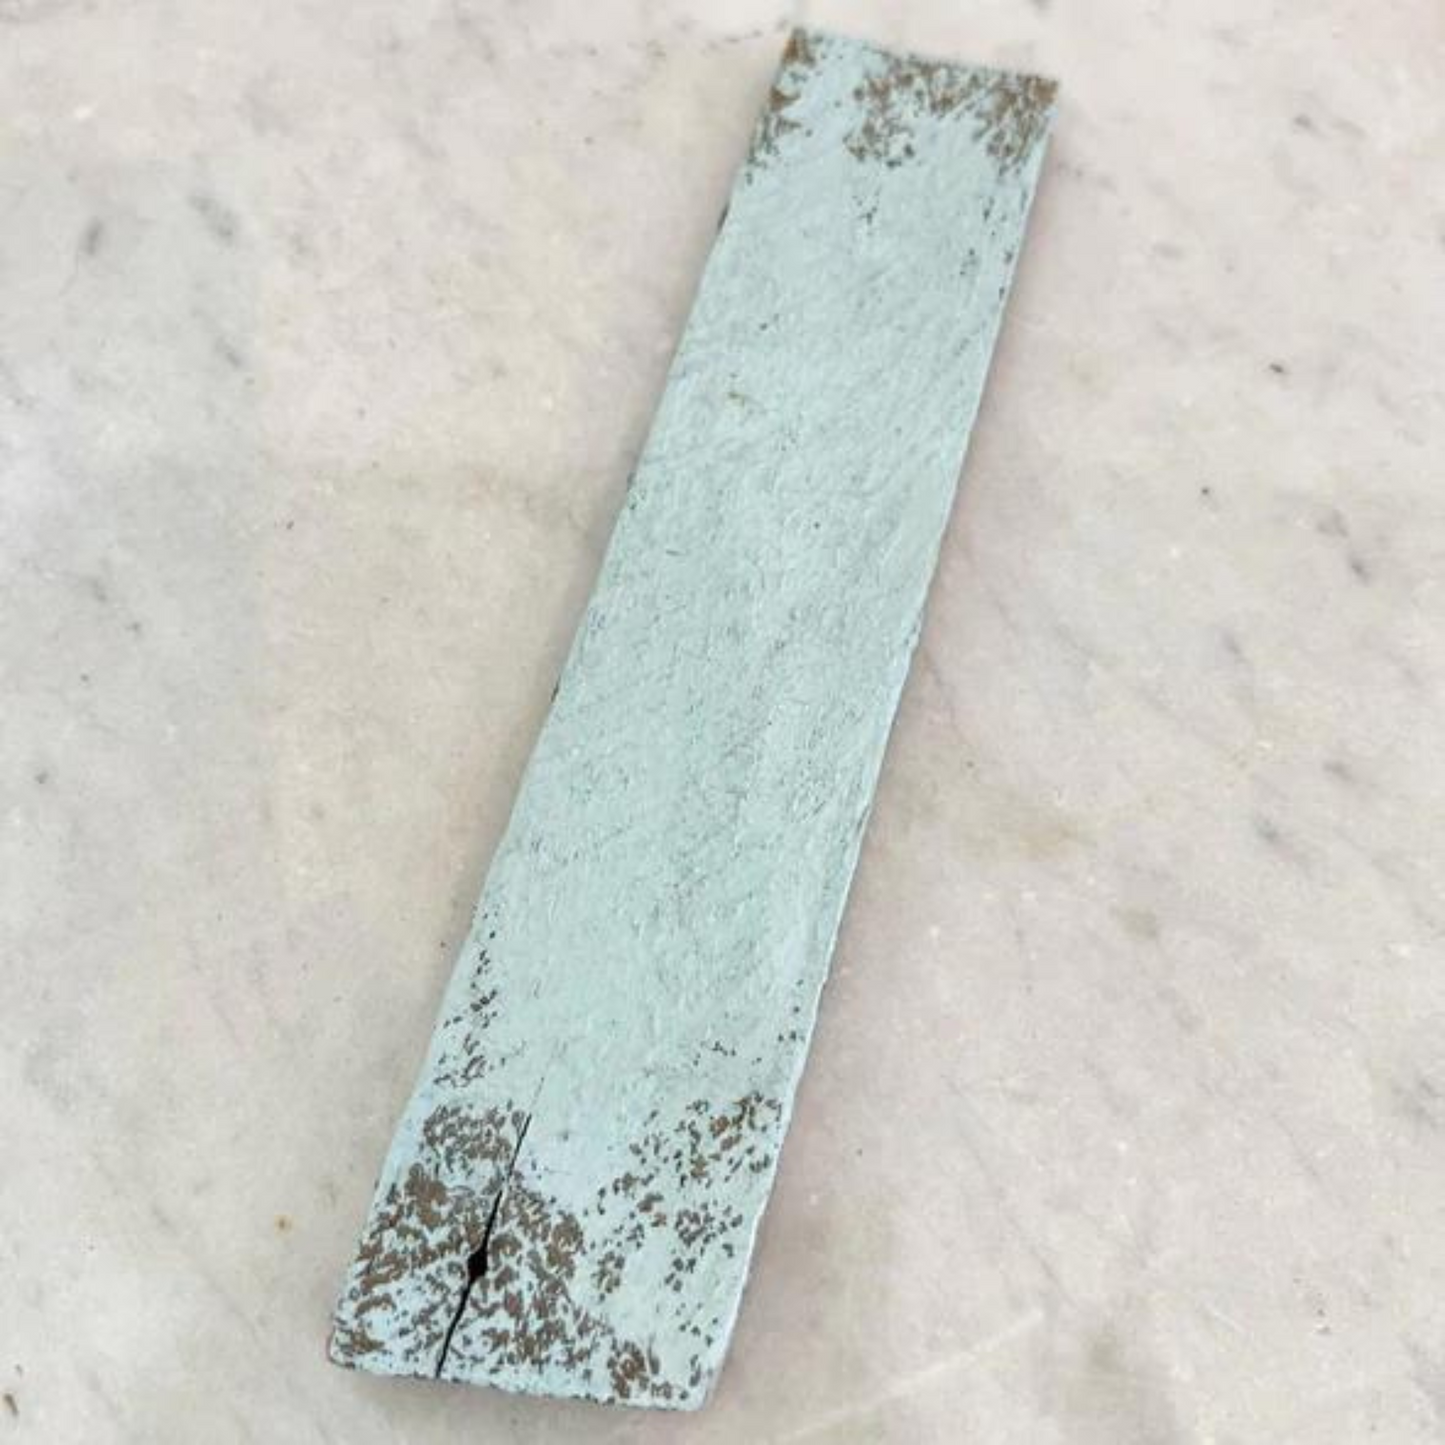 Painted plank example of Haint Blue - DIY Cottage Color Paint curated by Jamie Ray Vintage. Available in pints at Milton's Daughter.